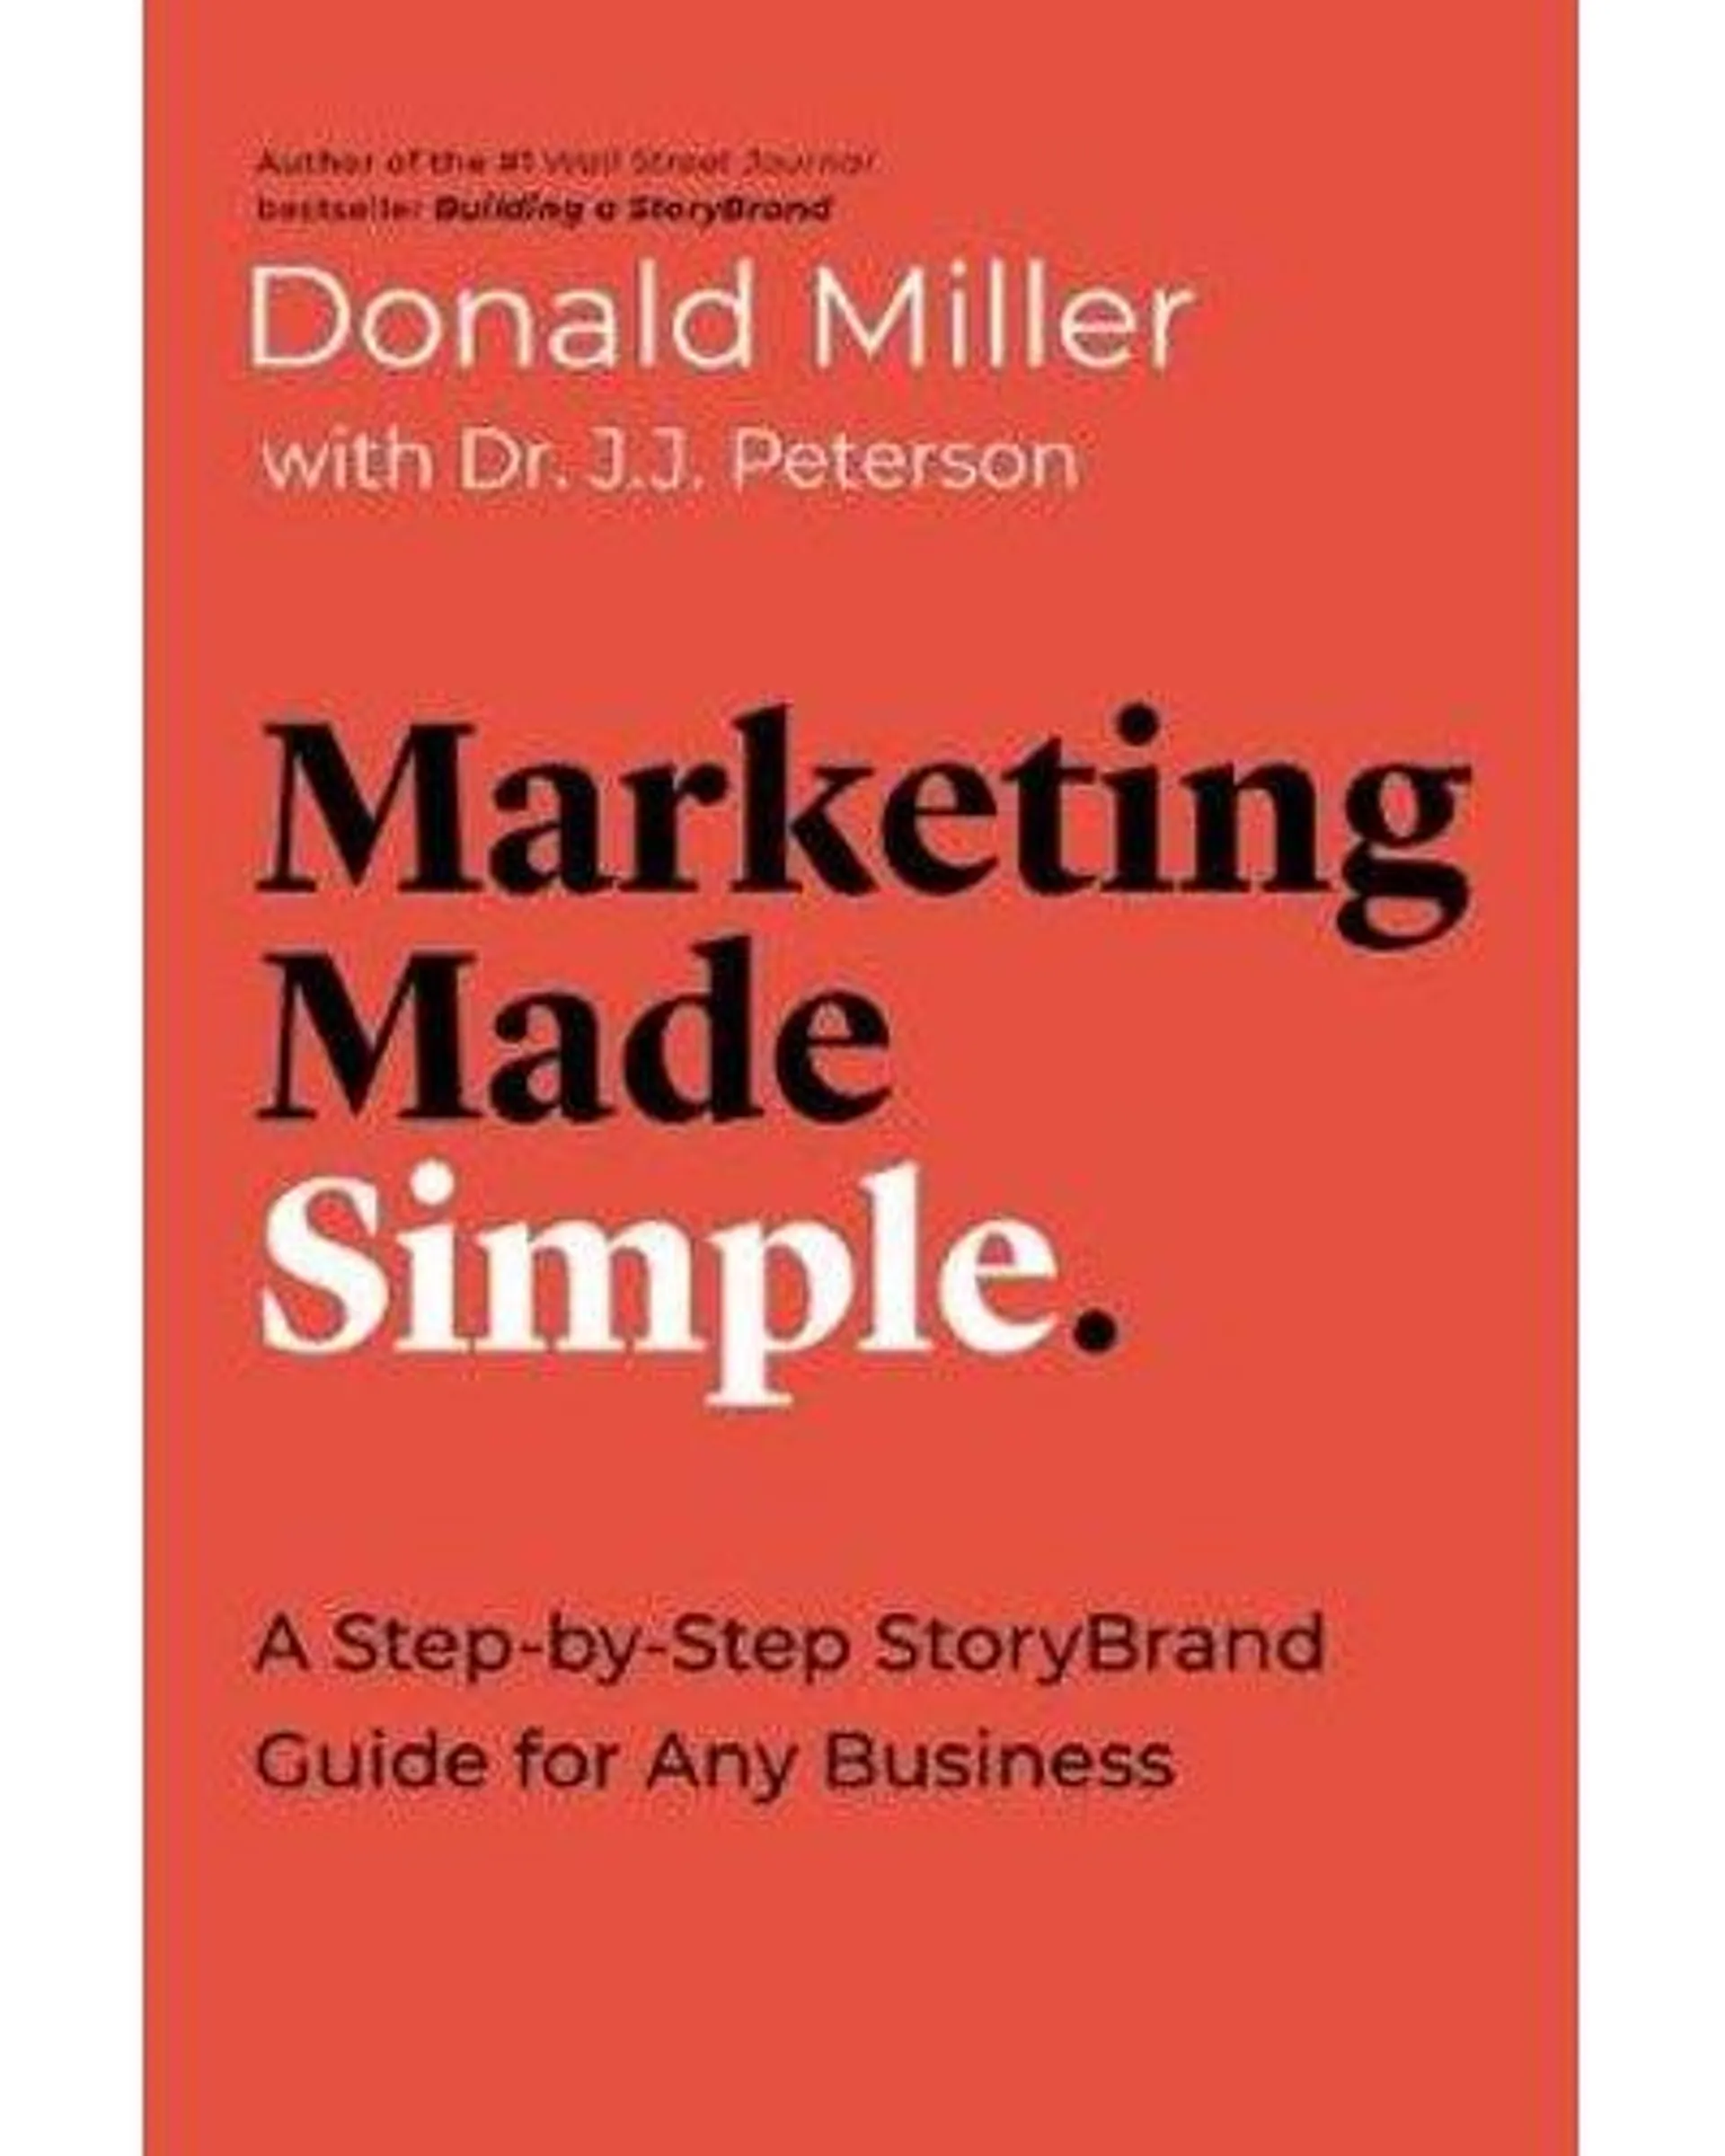 Marketing Made Simple - A Step-by-Step StoryBrand Guide for Any Business (Paperback)